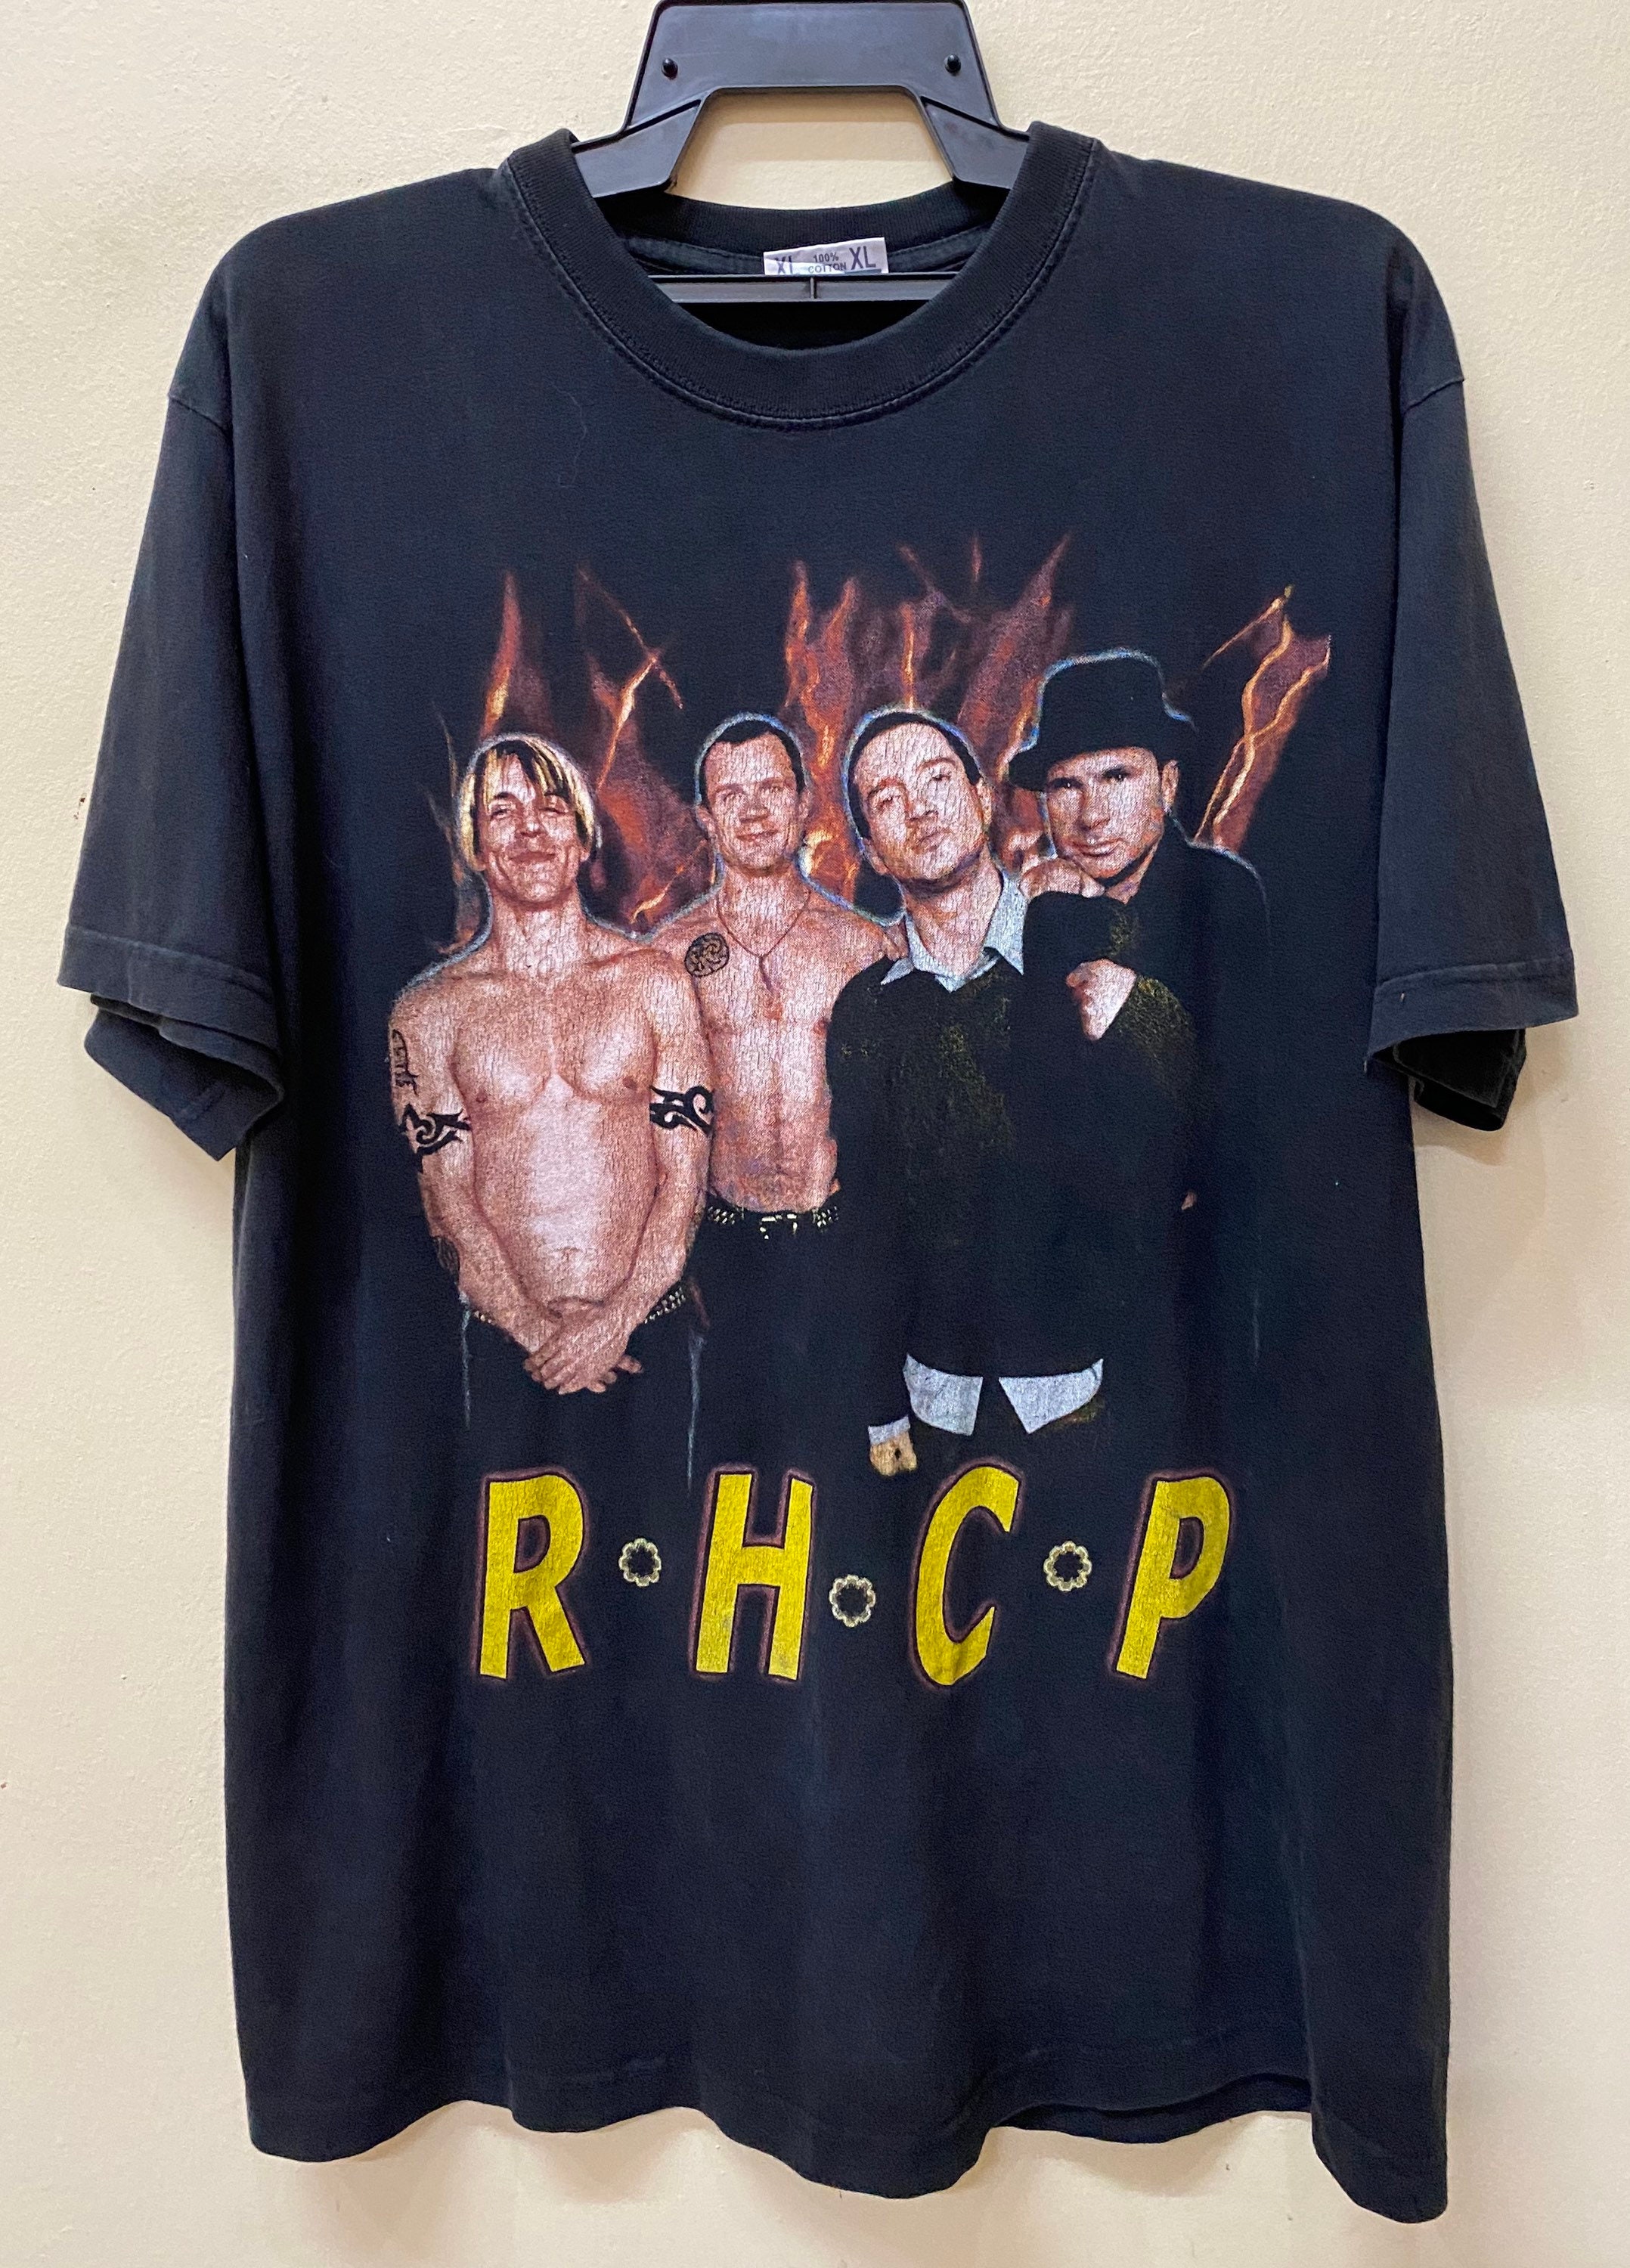 Vintage 90s Red Hot Chili Peppers bootleg t shirt - Etsy 日本